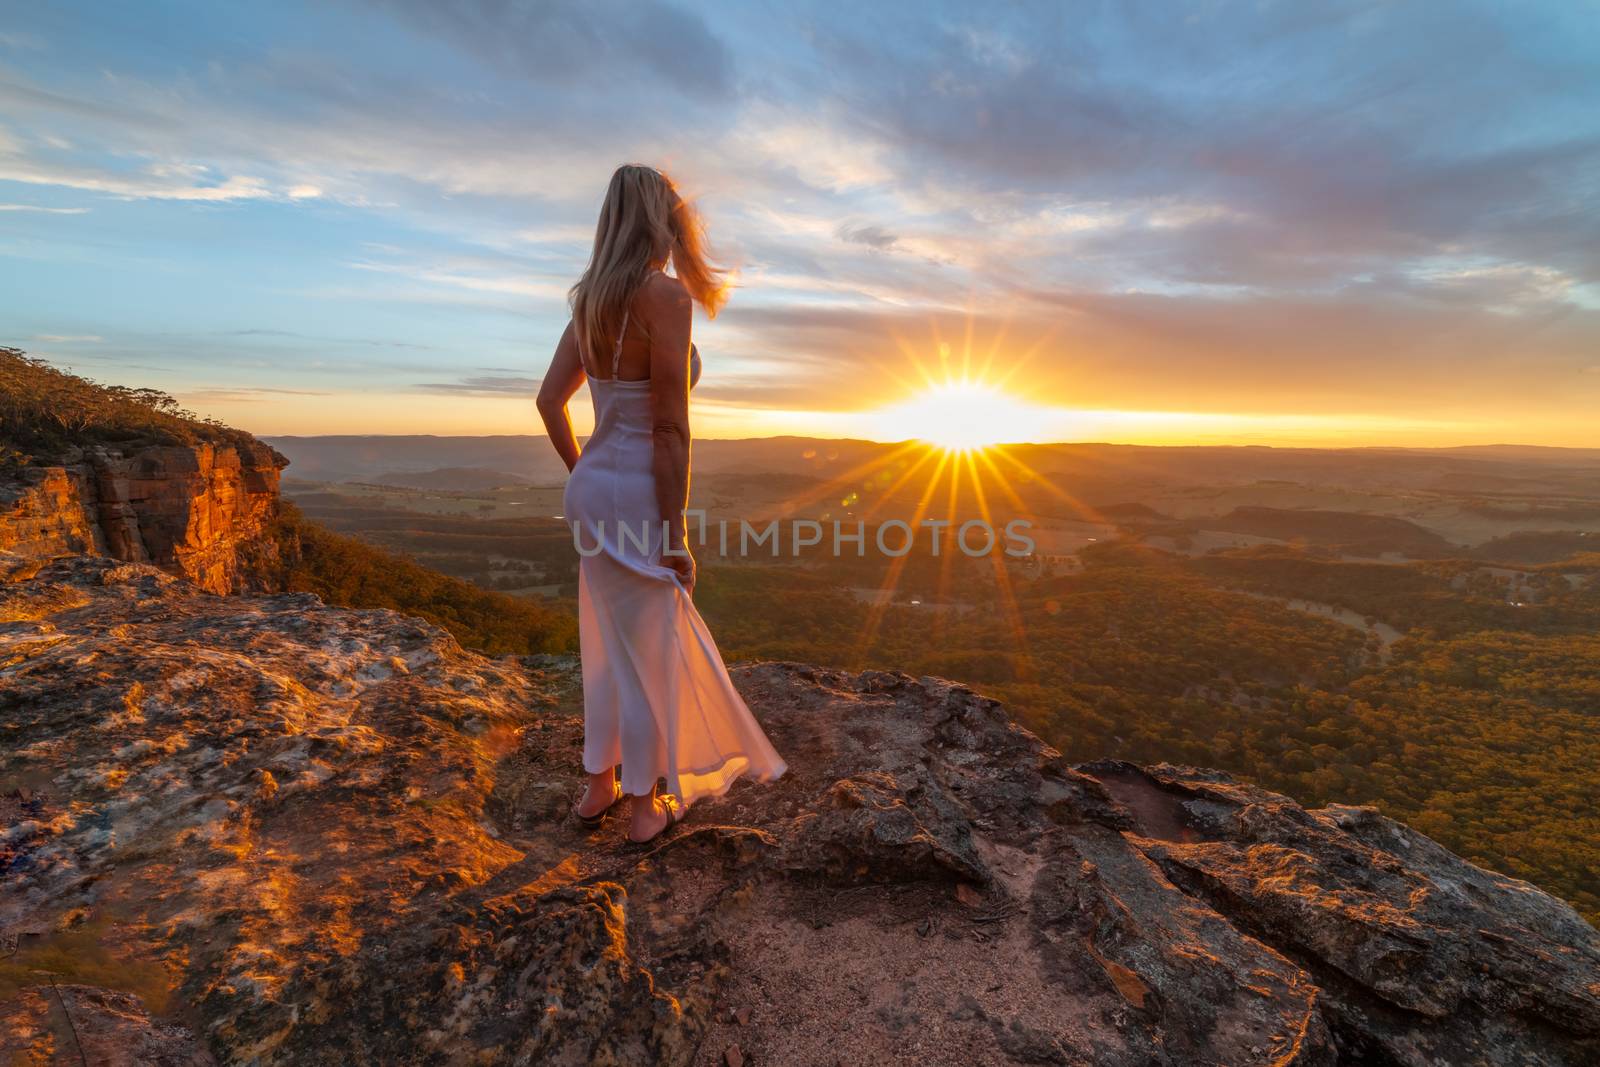 Woman in dress watching blissful sunsets from hidden cliff ledges with spectacular views by lovleah